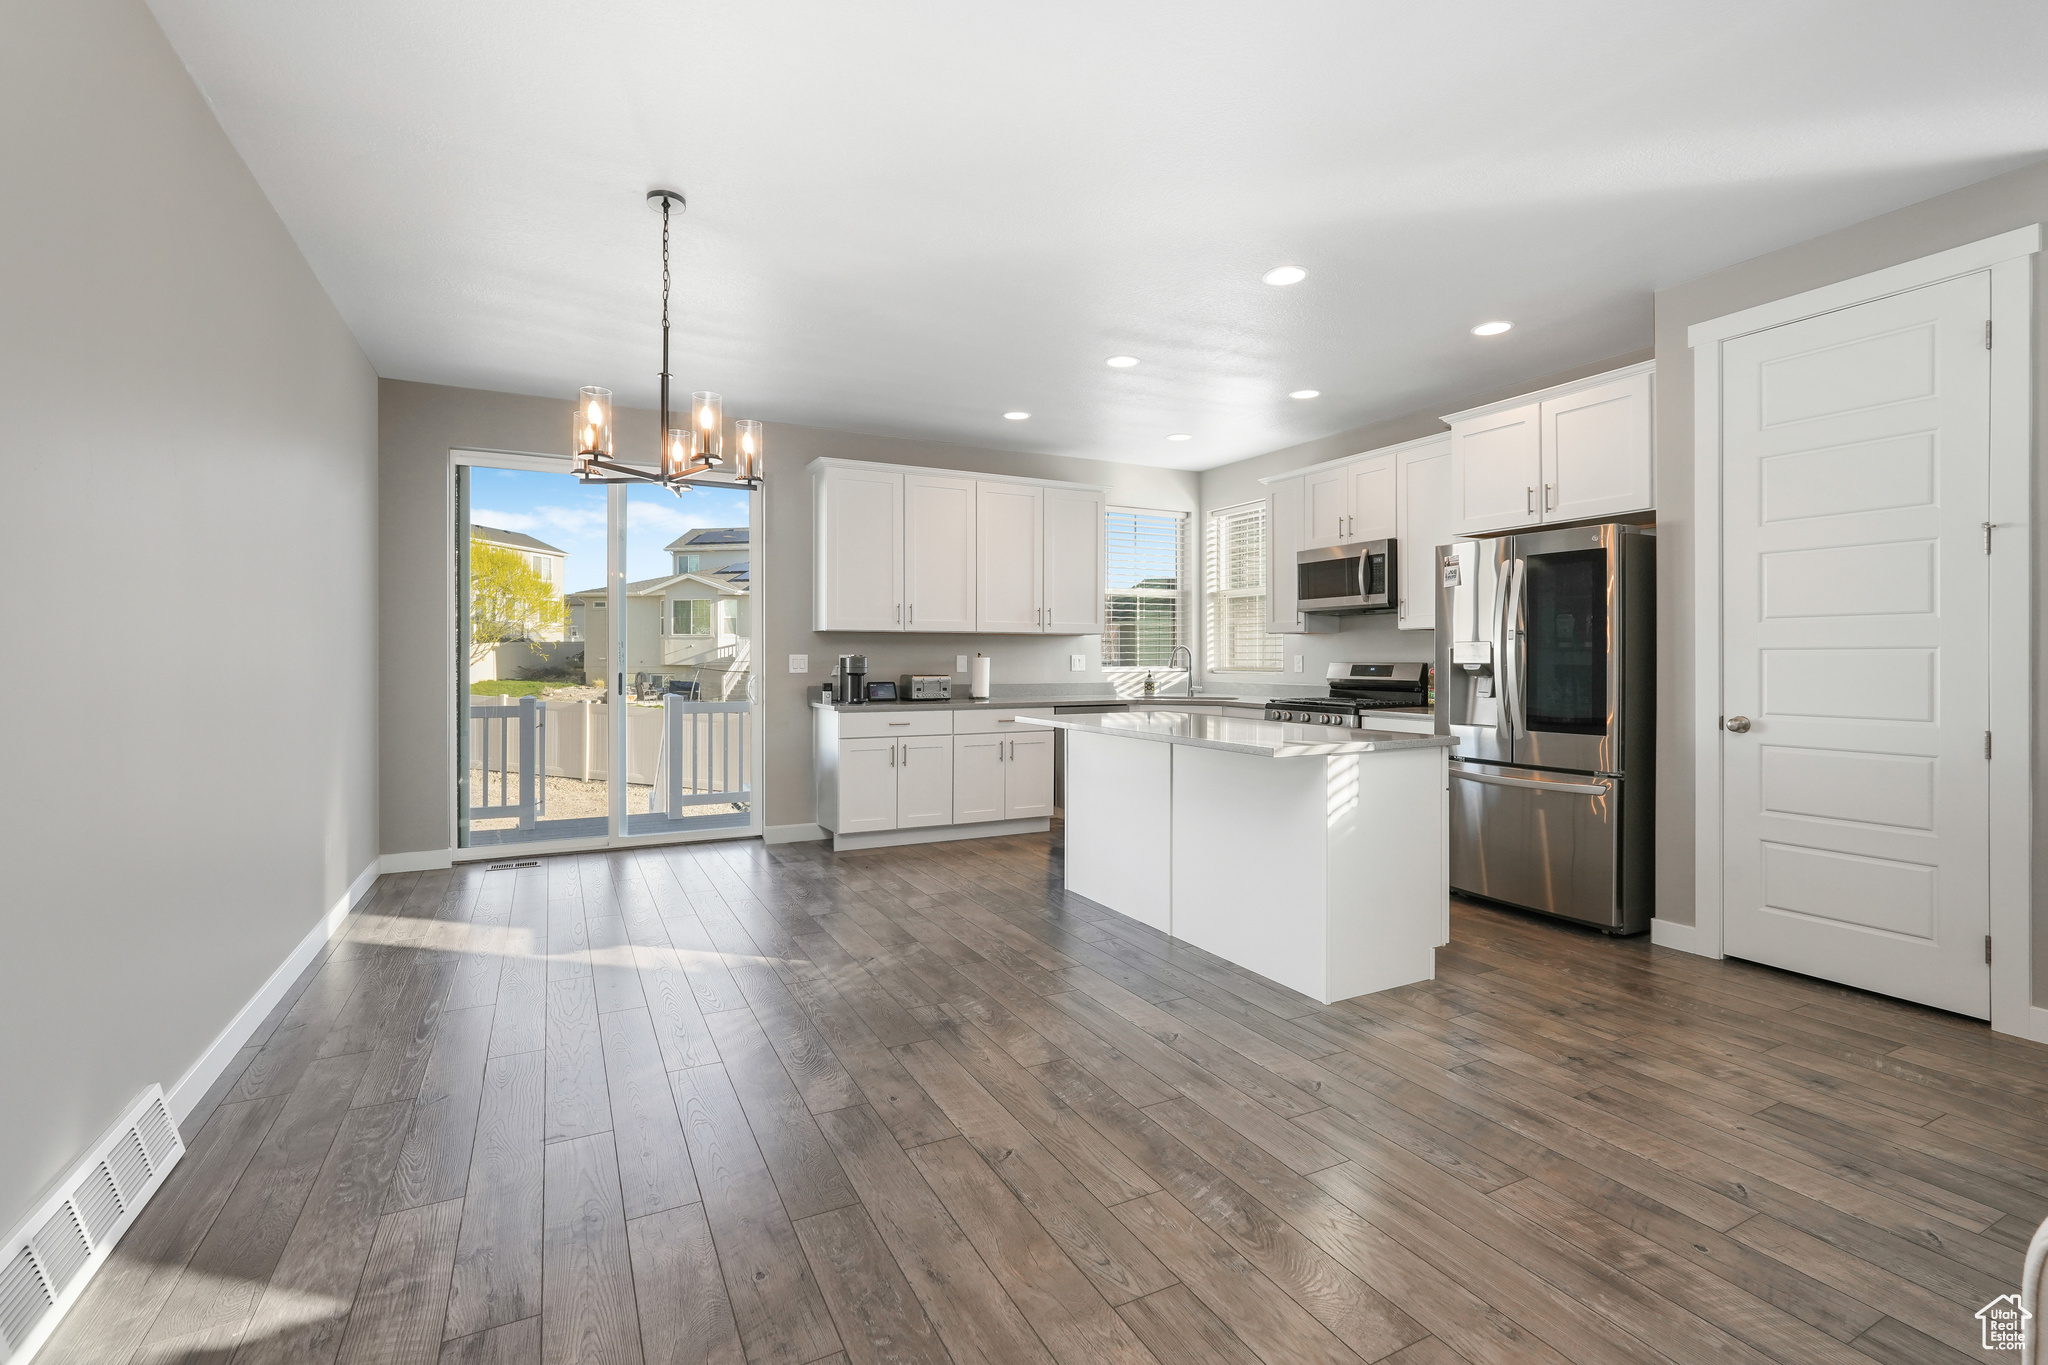 Kitchen featuring dark hardwood / wood-style flooring, stainless steel appliances, white cabinetry, and decorative light fixtures